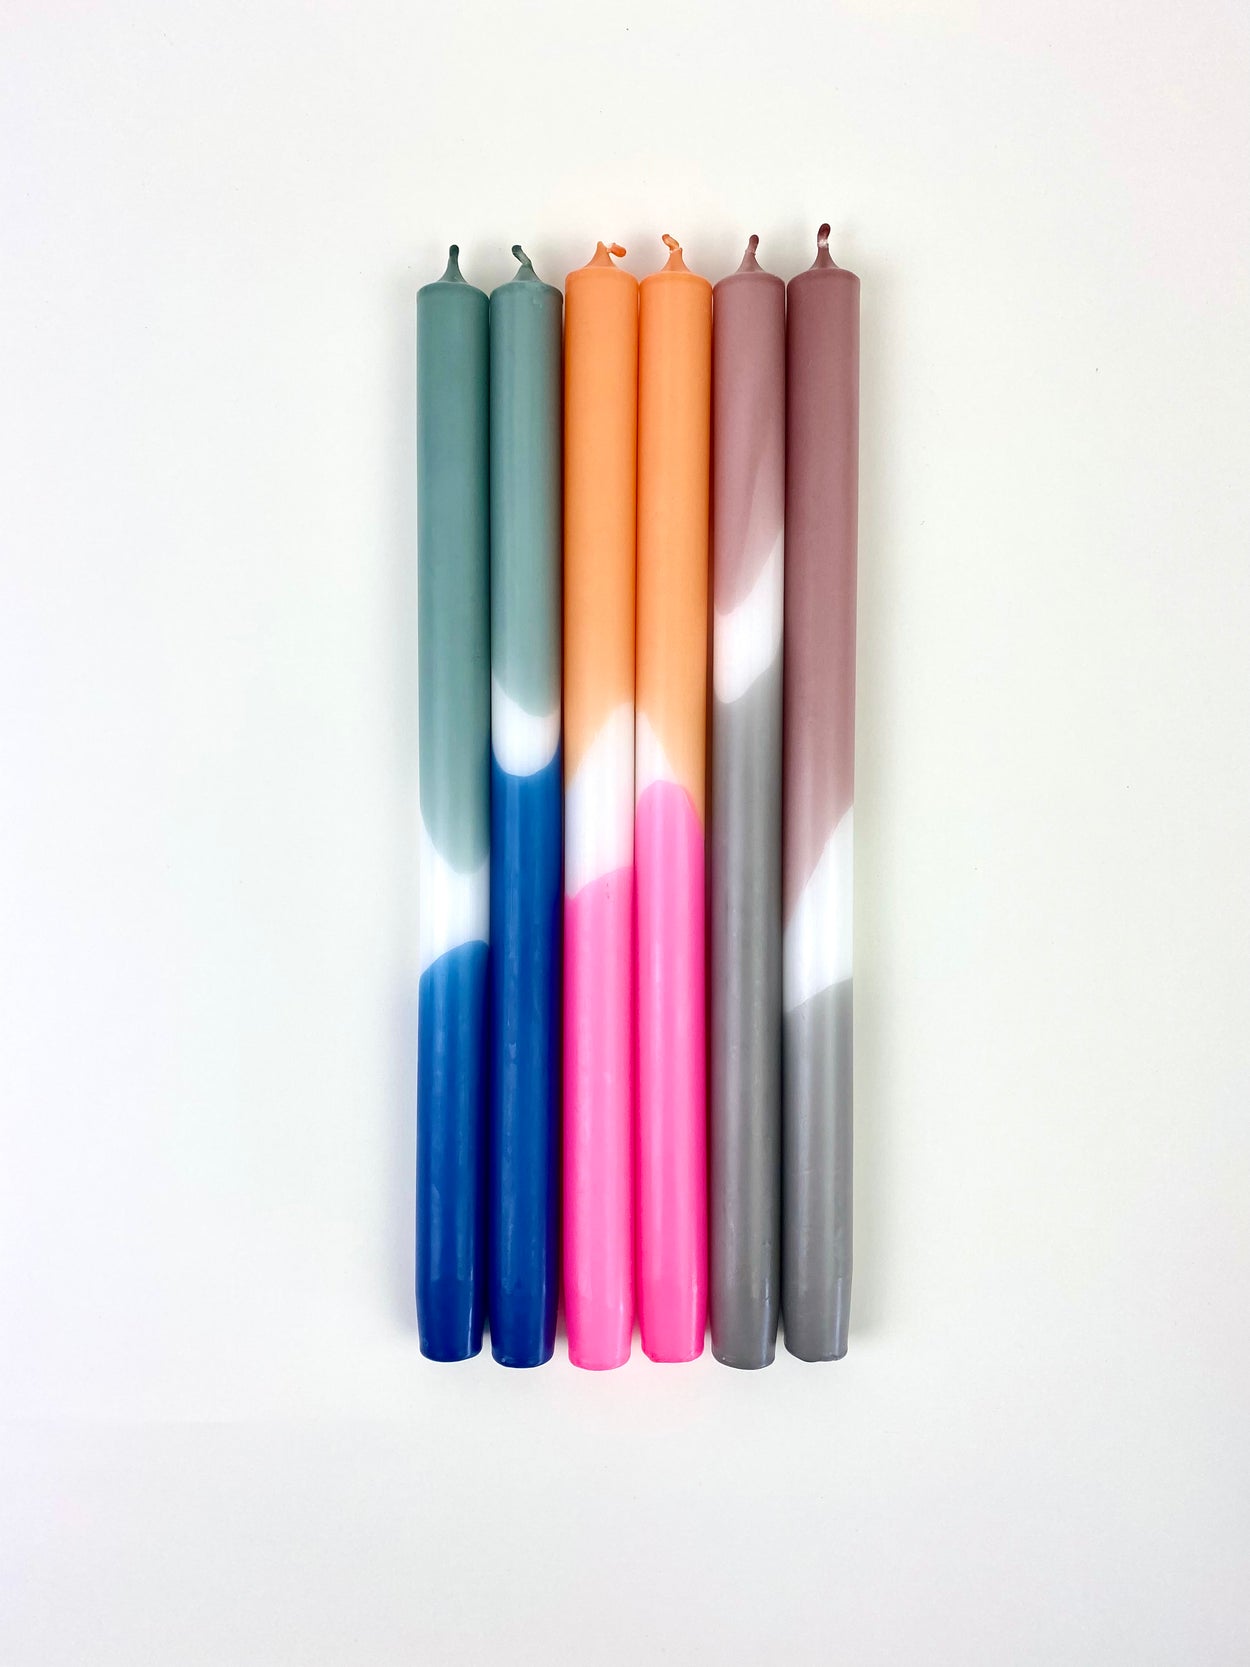 Hand Dipped Dinner Candles - Pink and Orange, Maroon and Blue with white background.